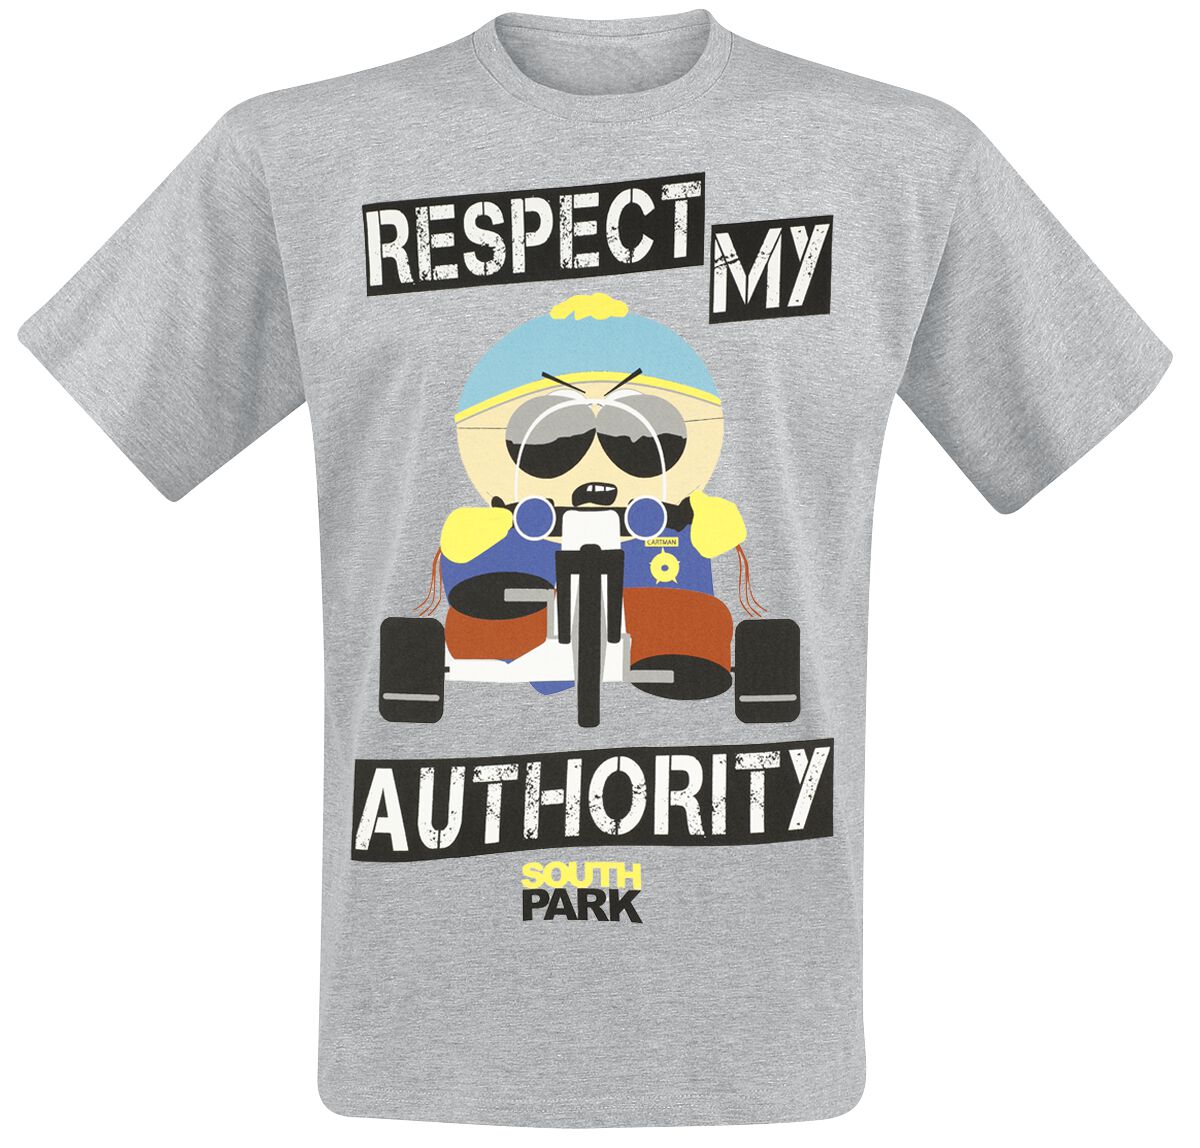 South Park Respect My Authority T-Shirt grey product